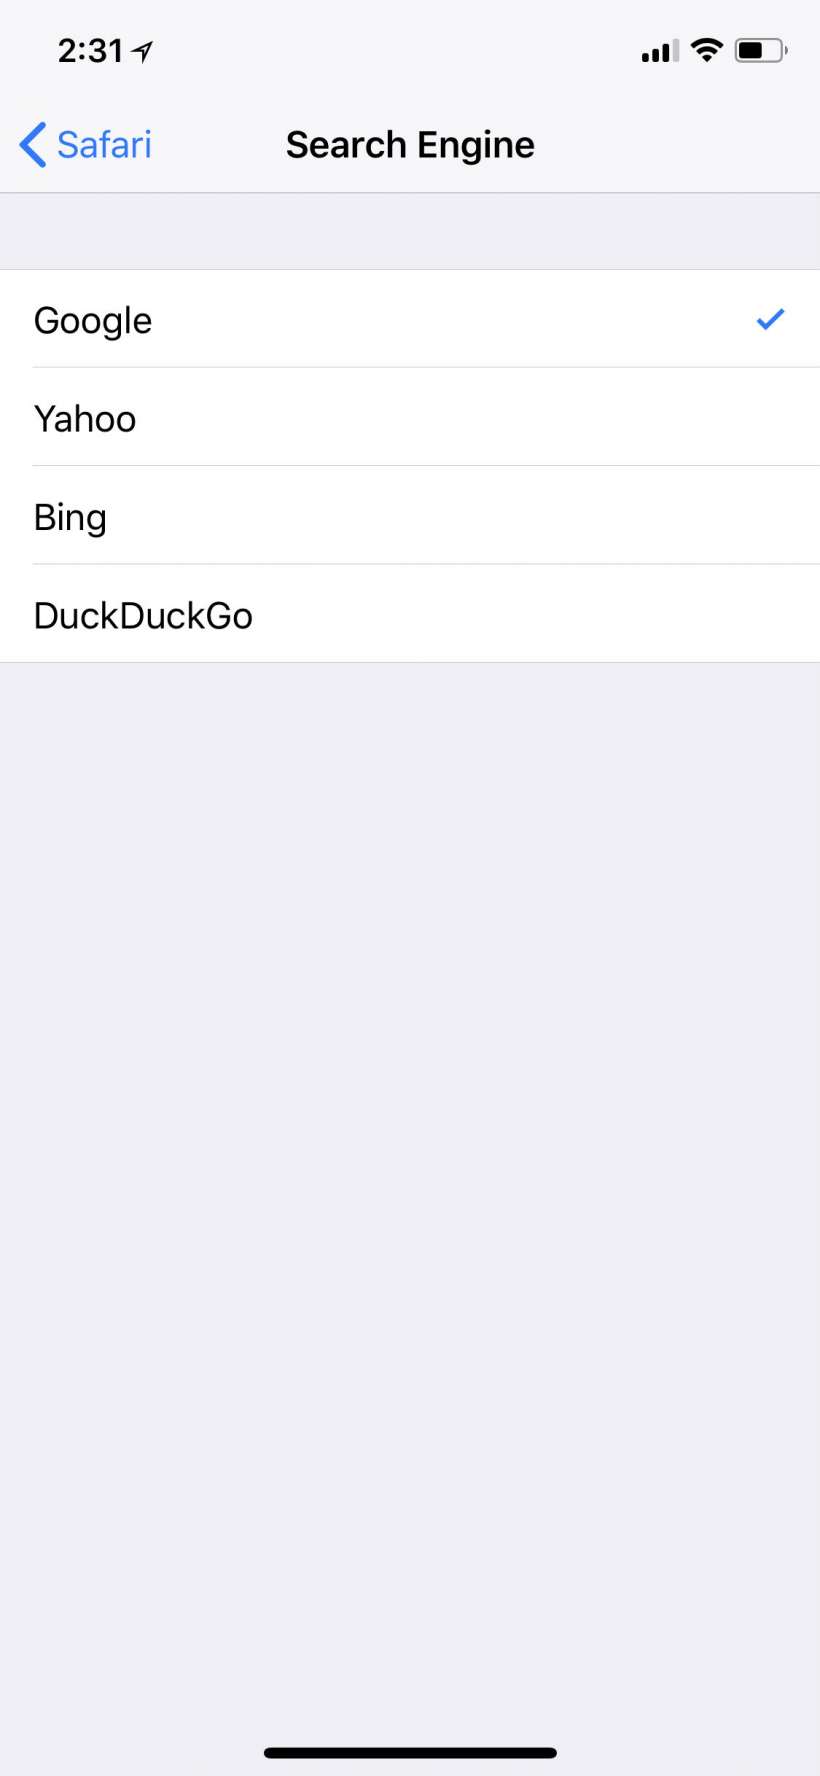 How to set Safari's default search engine to Google, Yahoo, Bing or DuckDuckGo on iPhone and iPad.